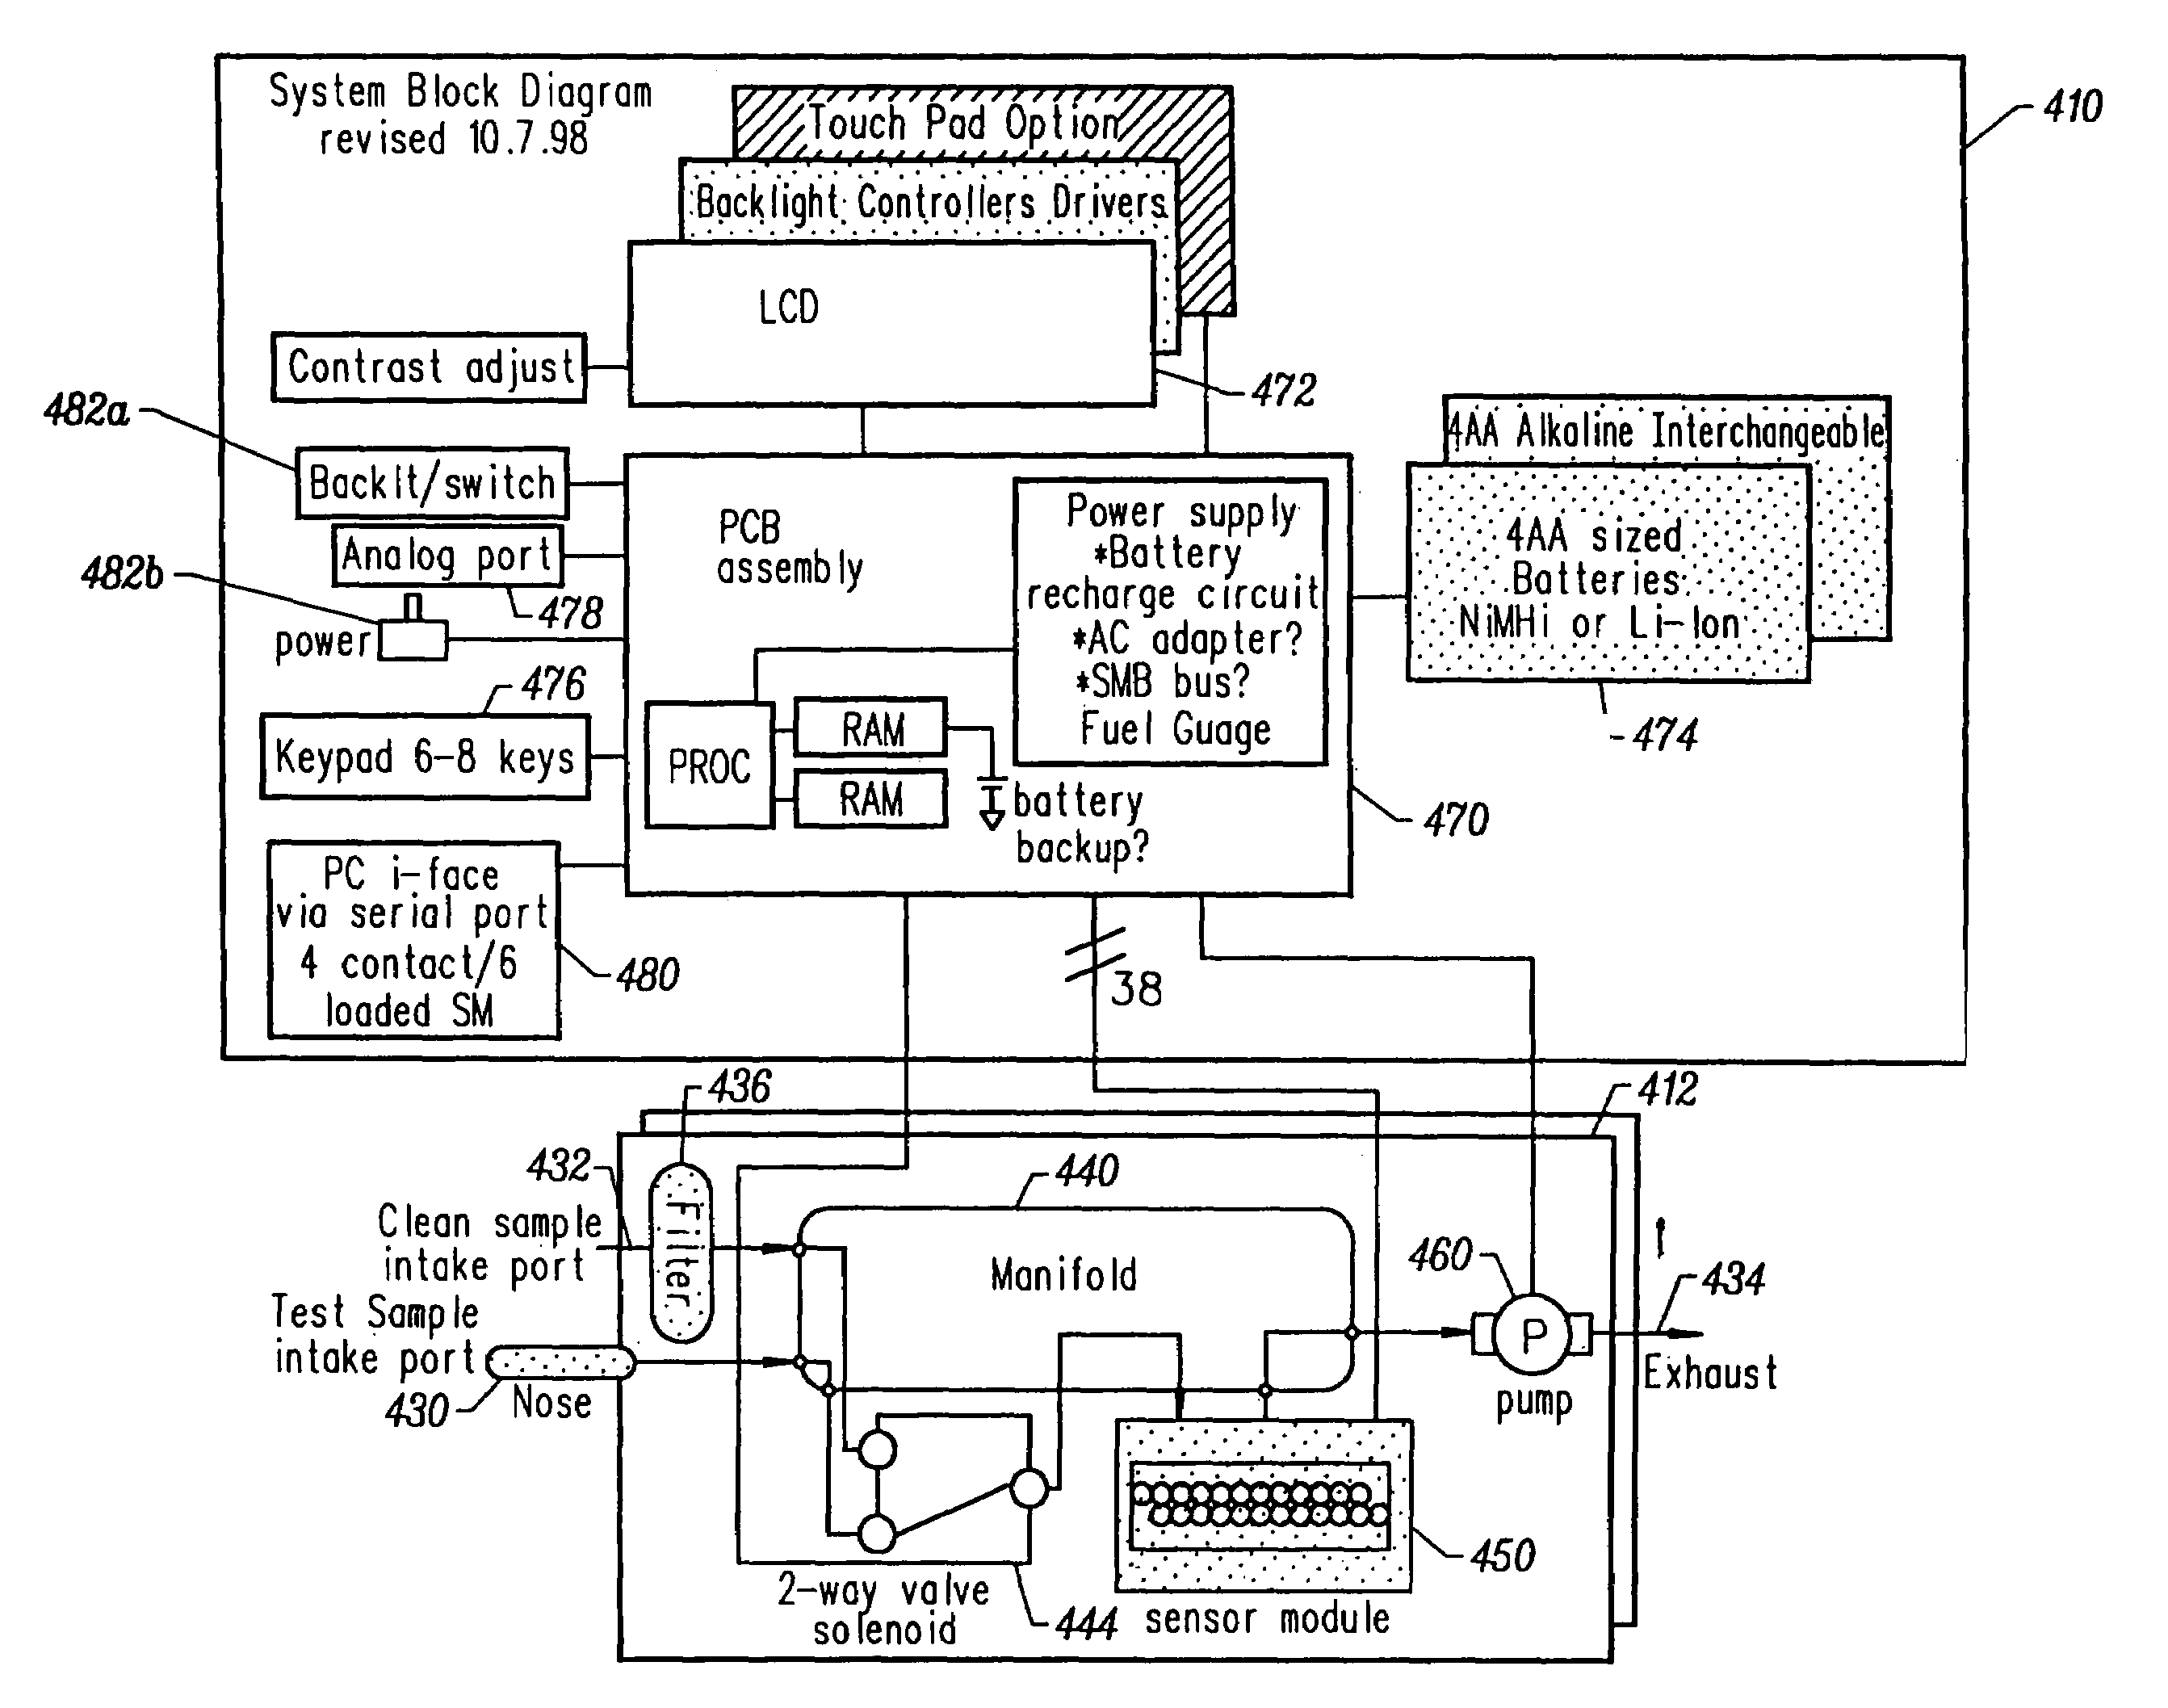 Apparatus, systems and methods for detecting and transmitting sensory data over a computer network